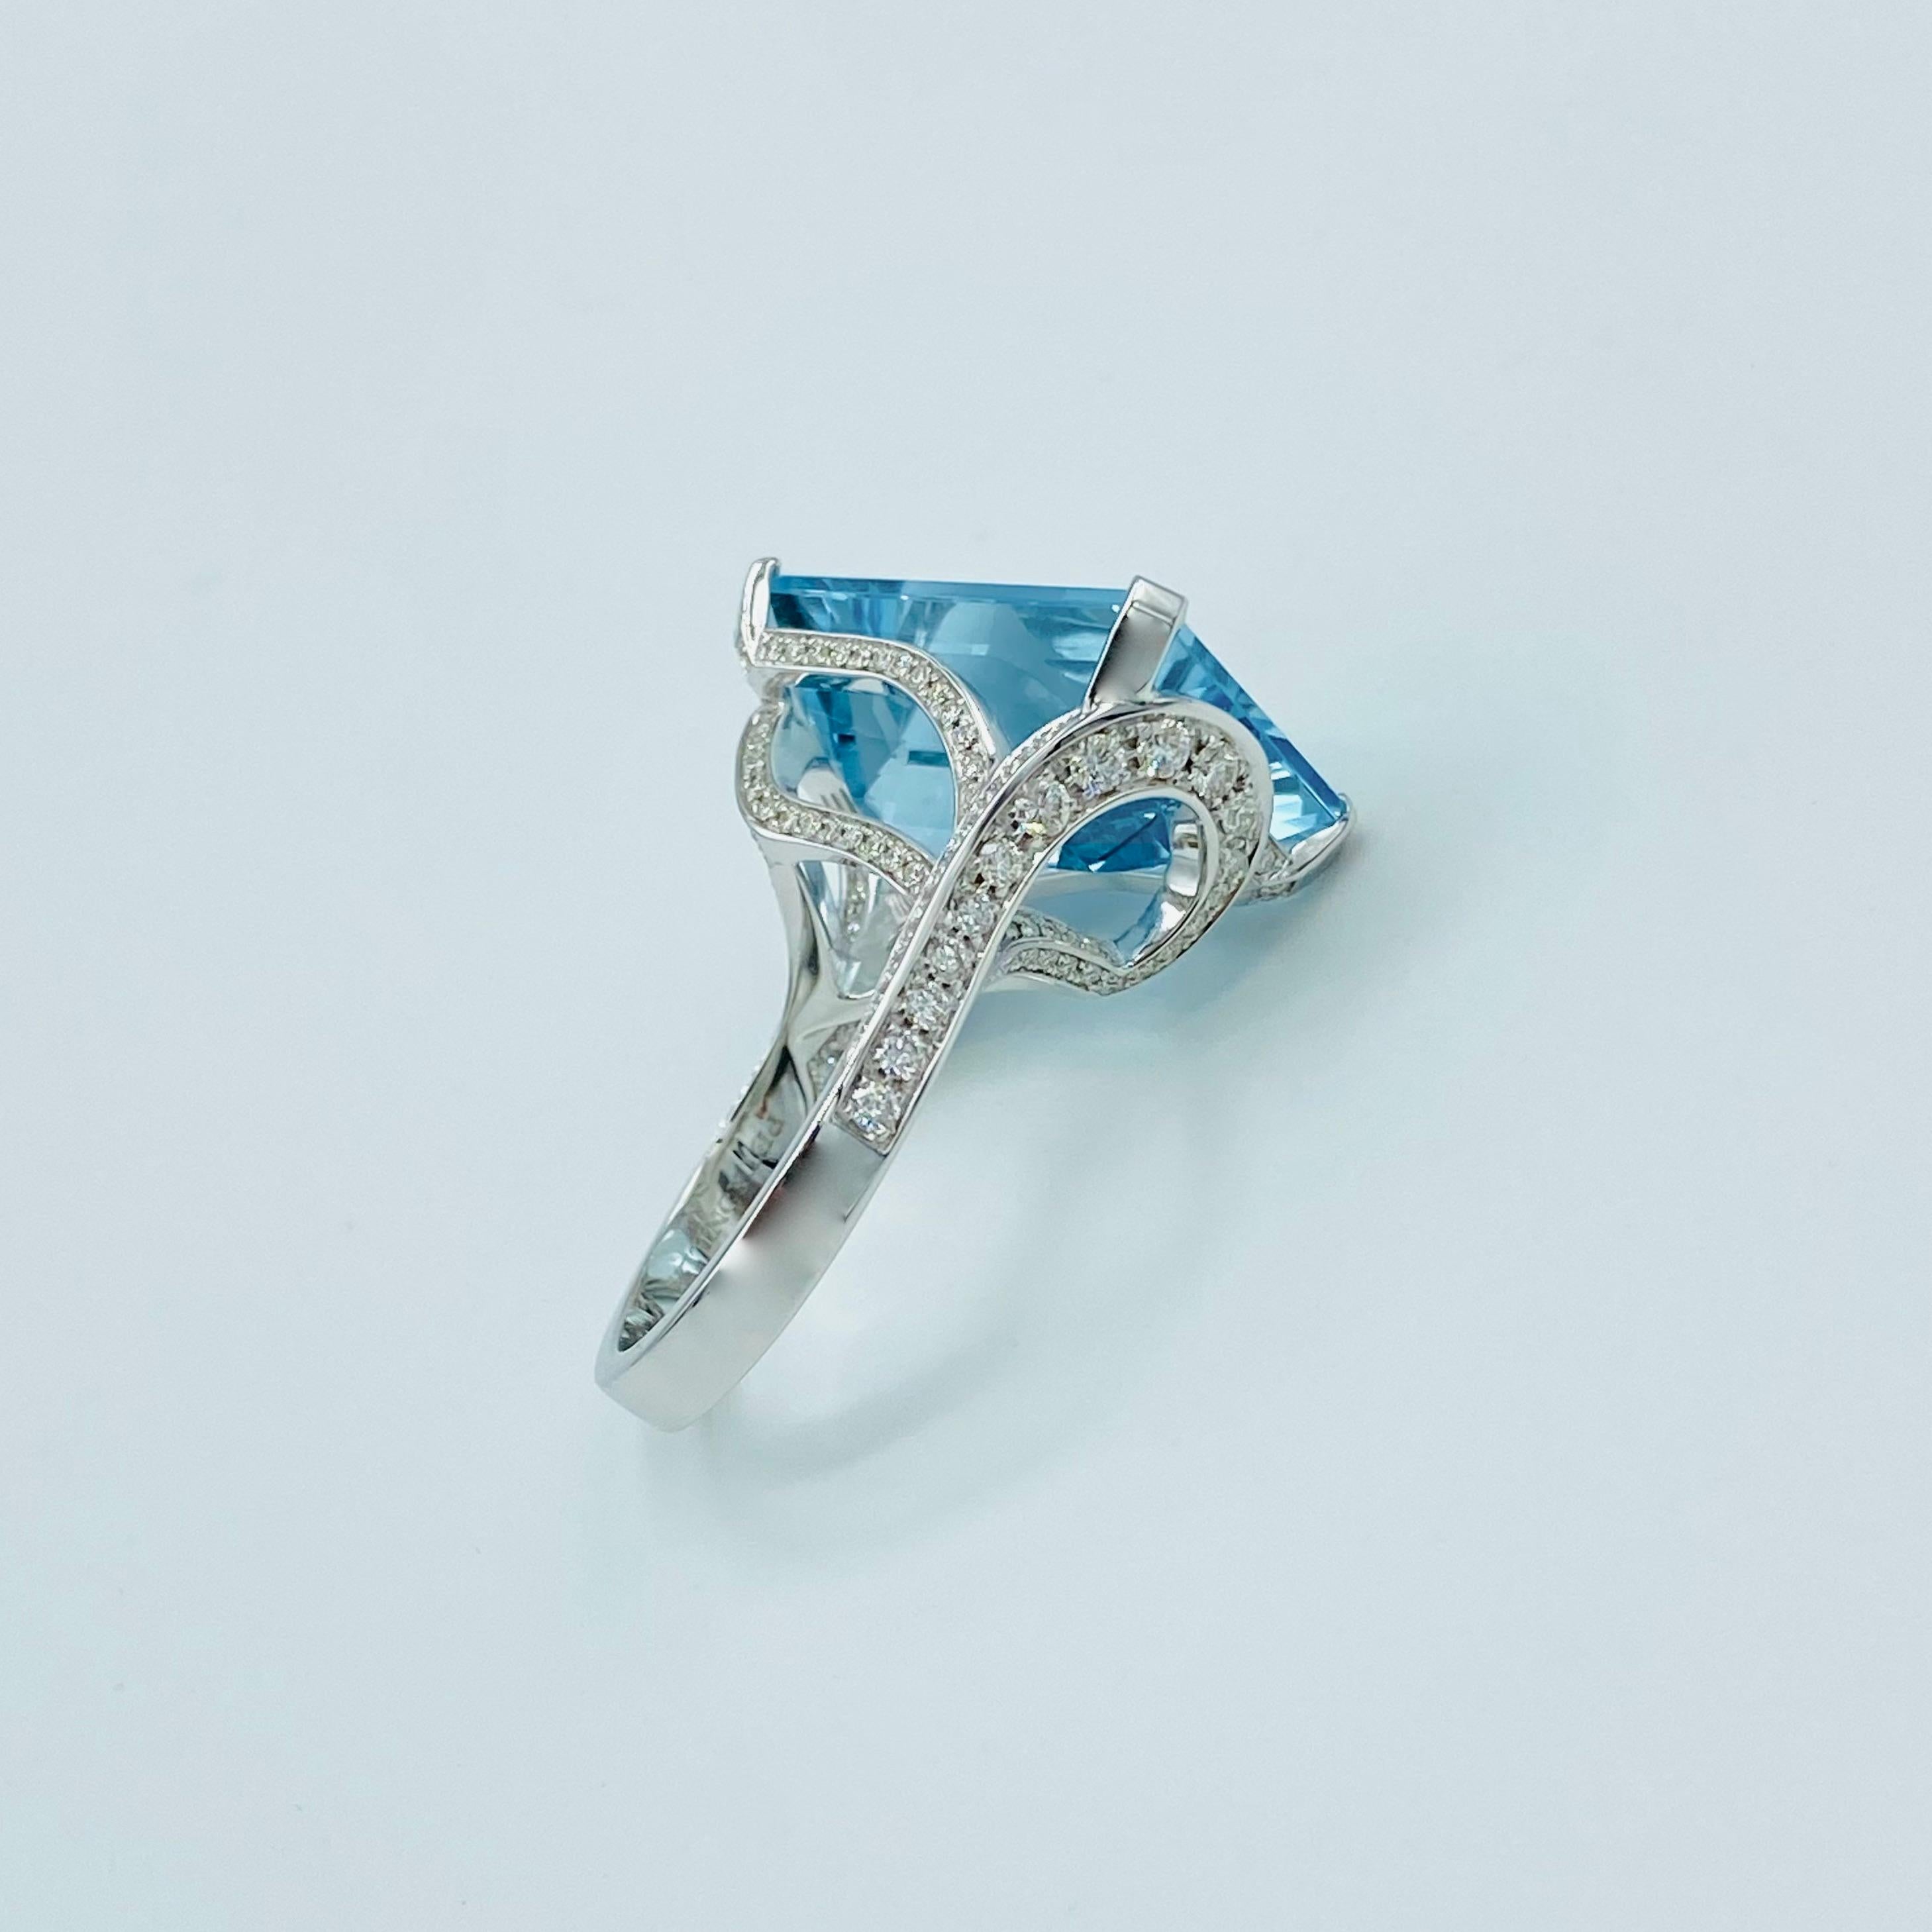 Ct 13.17 Aquamarine White Diamond Cocktail 18Kt Gold Made in Italy Ring For Sale 4